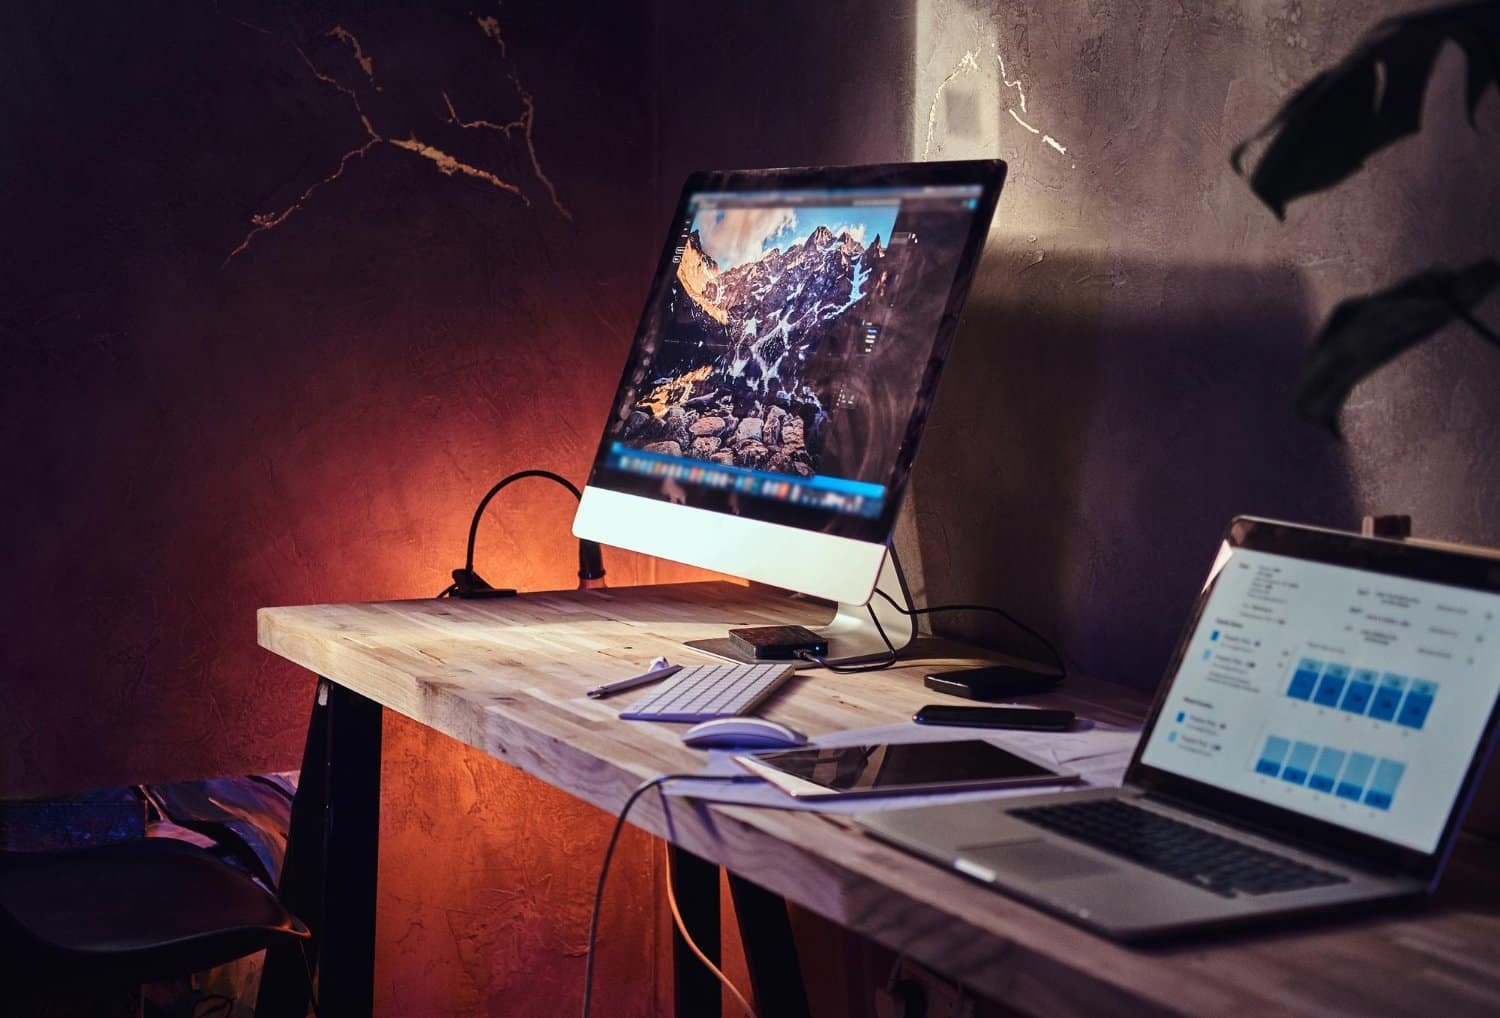 Desktop vs All-in-One PCs: What’s Best for You?